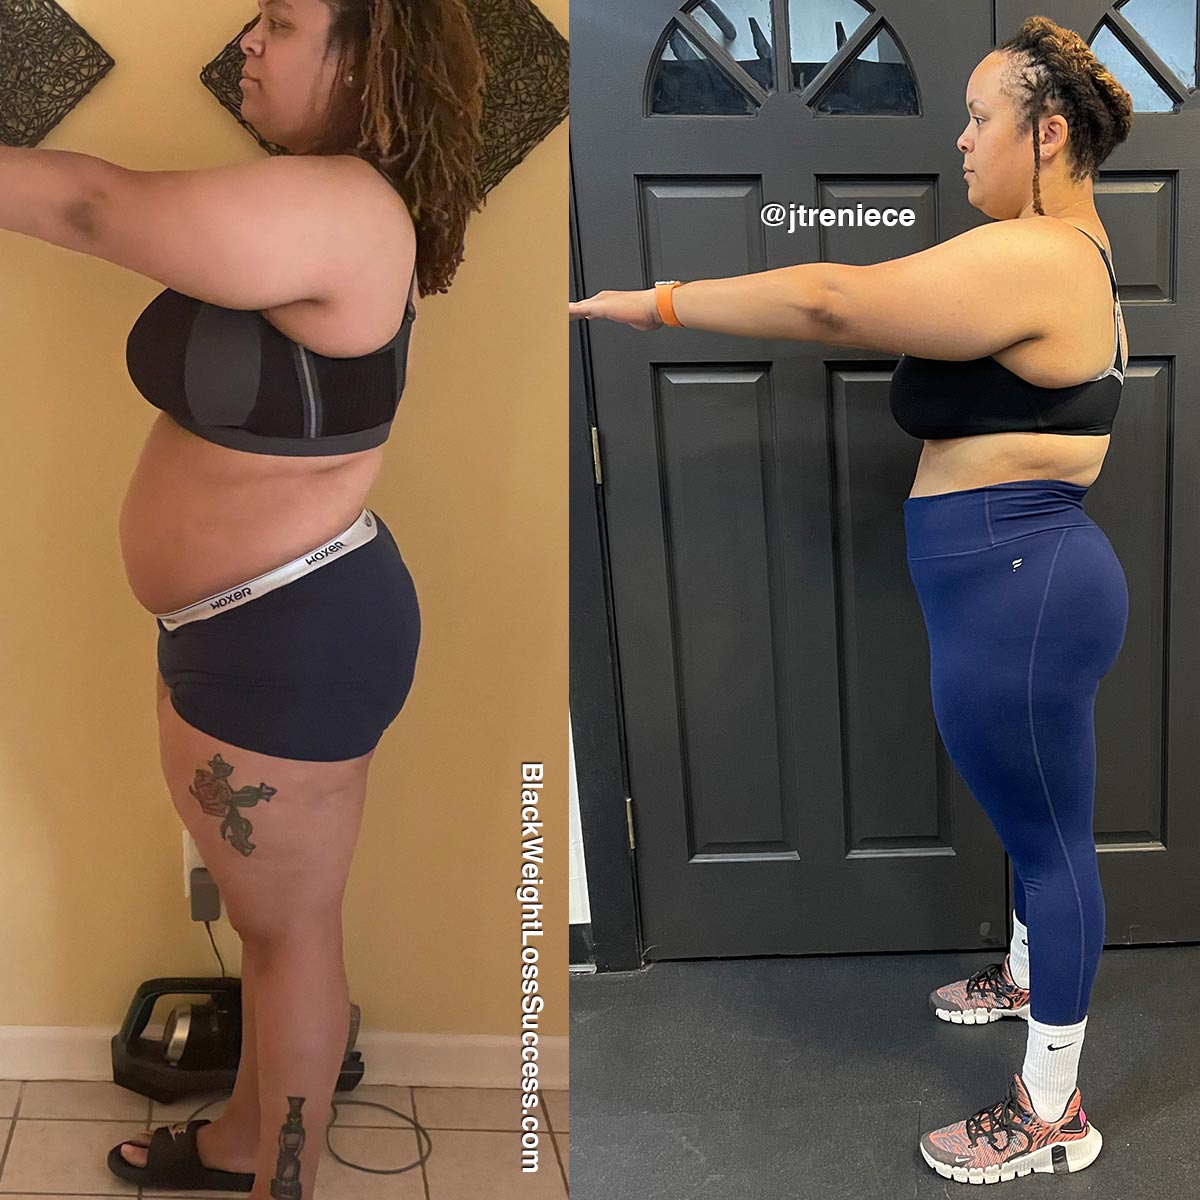 Jasmine before and after weight loss